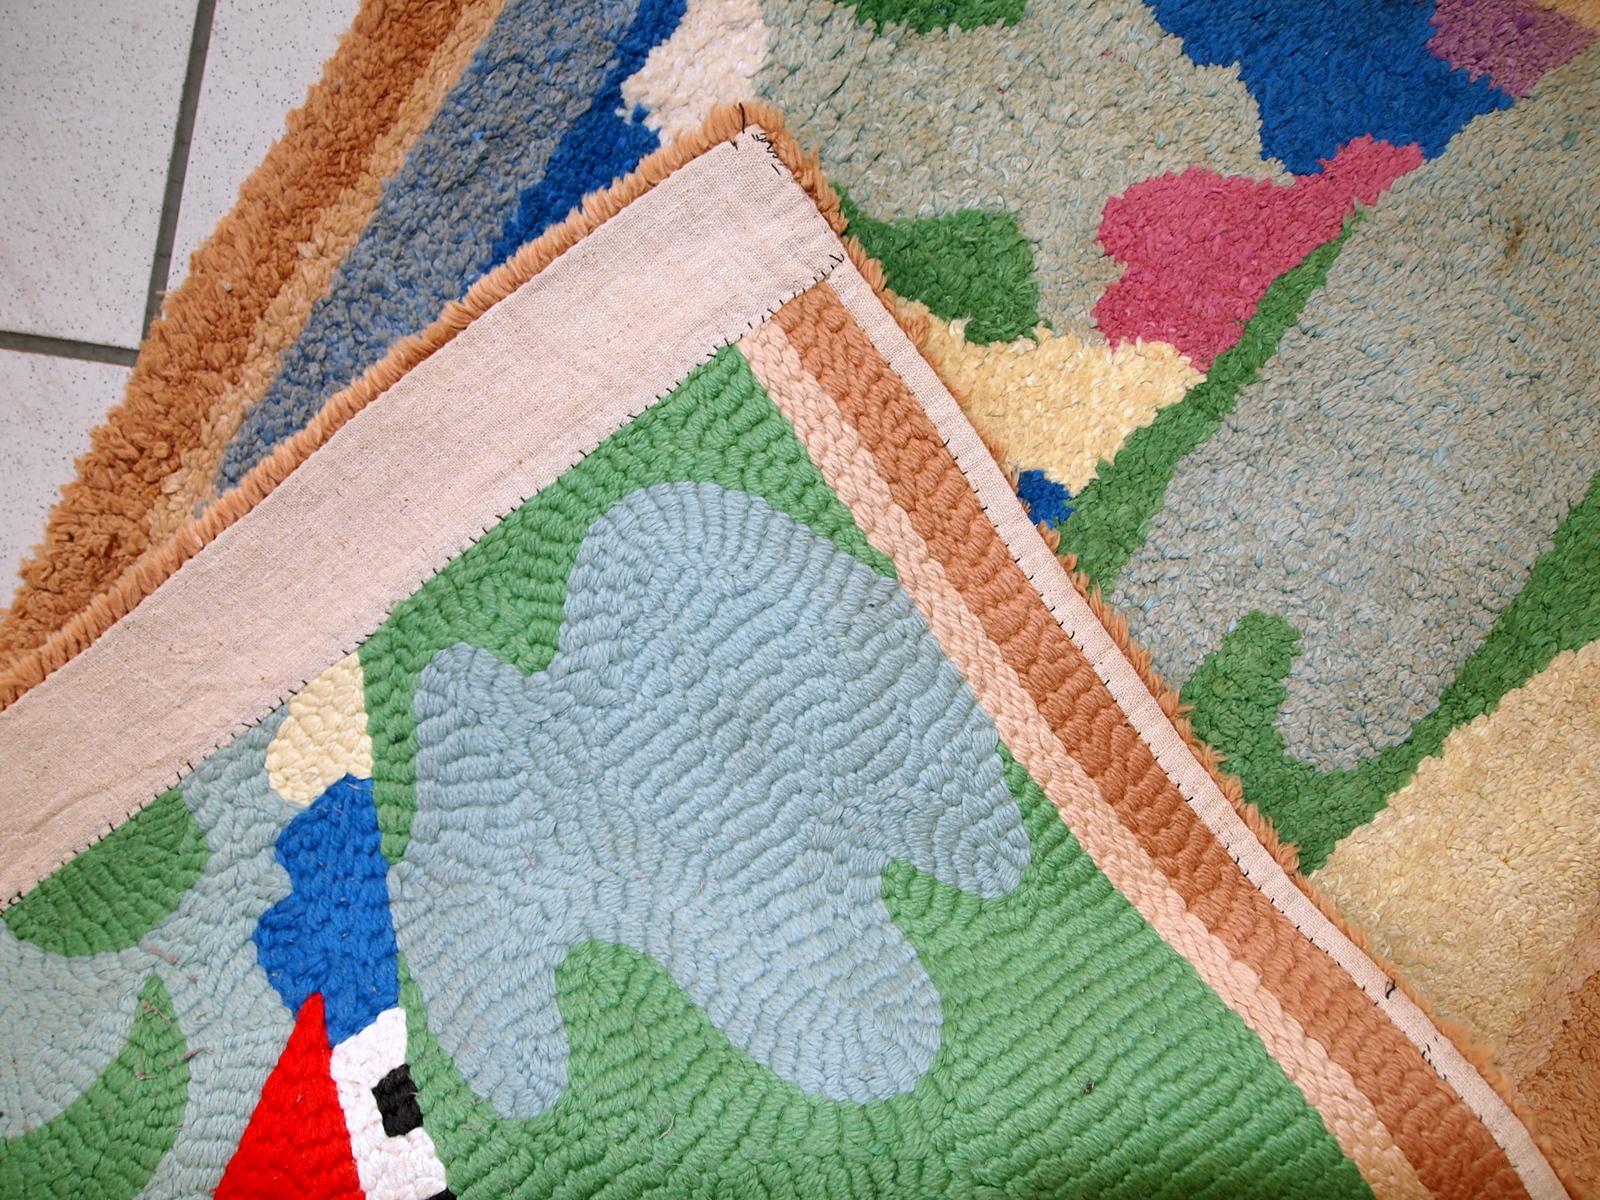 Handmade vintage American Hooked rug from the end of 20th century. The rug has been made in USA. It is in original good condition.

- Condition: Original good,

- circa: 1970s,

- Size: 1.9' x 2.9' (58cm x 91cm),

- Material: Wool,

-